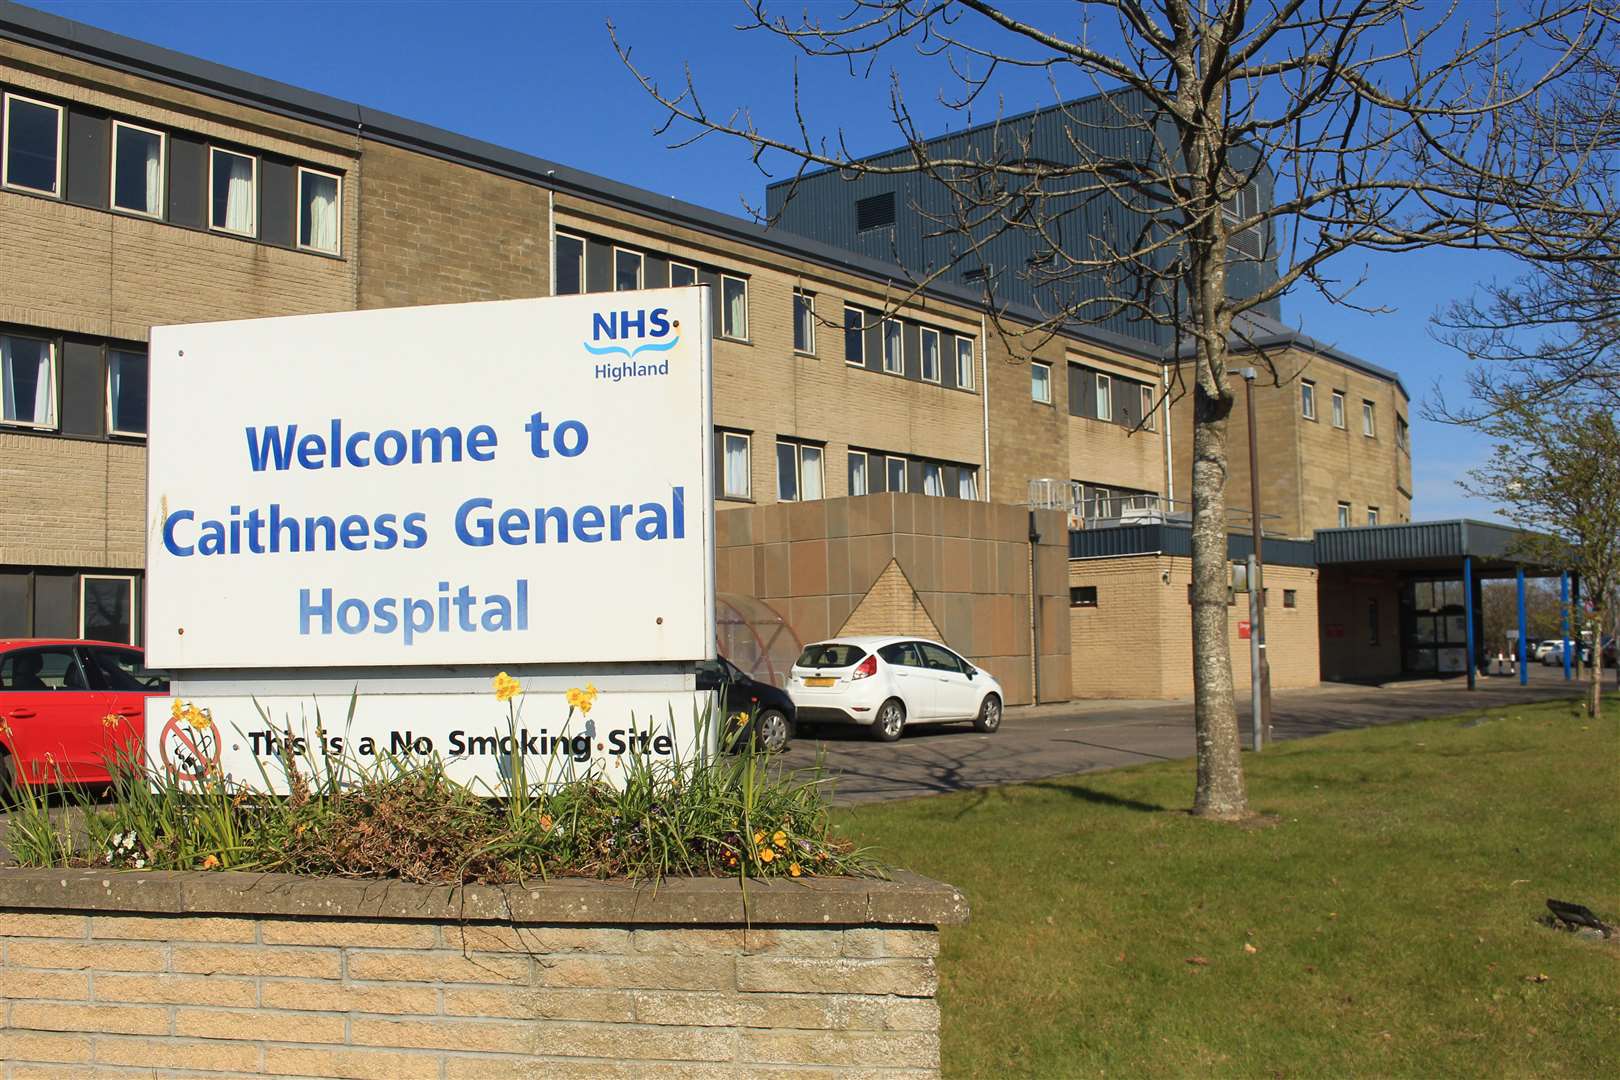 Caithness General Hospital in Wick. NHS Highland says it will provide an update on visiting guidance at its hospitals as soon as it can.